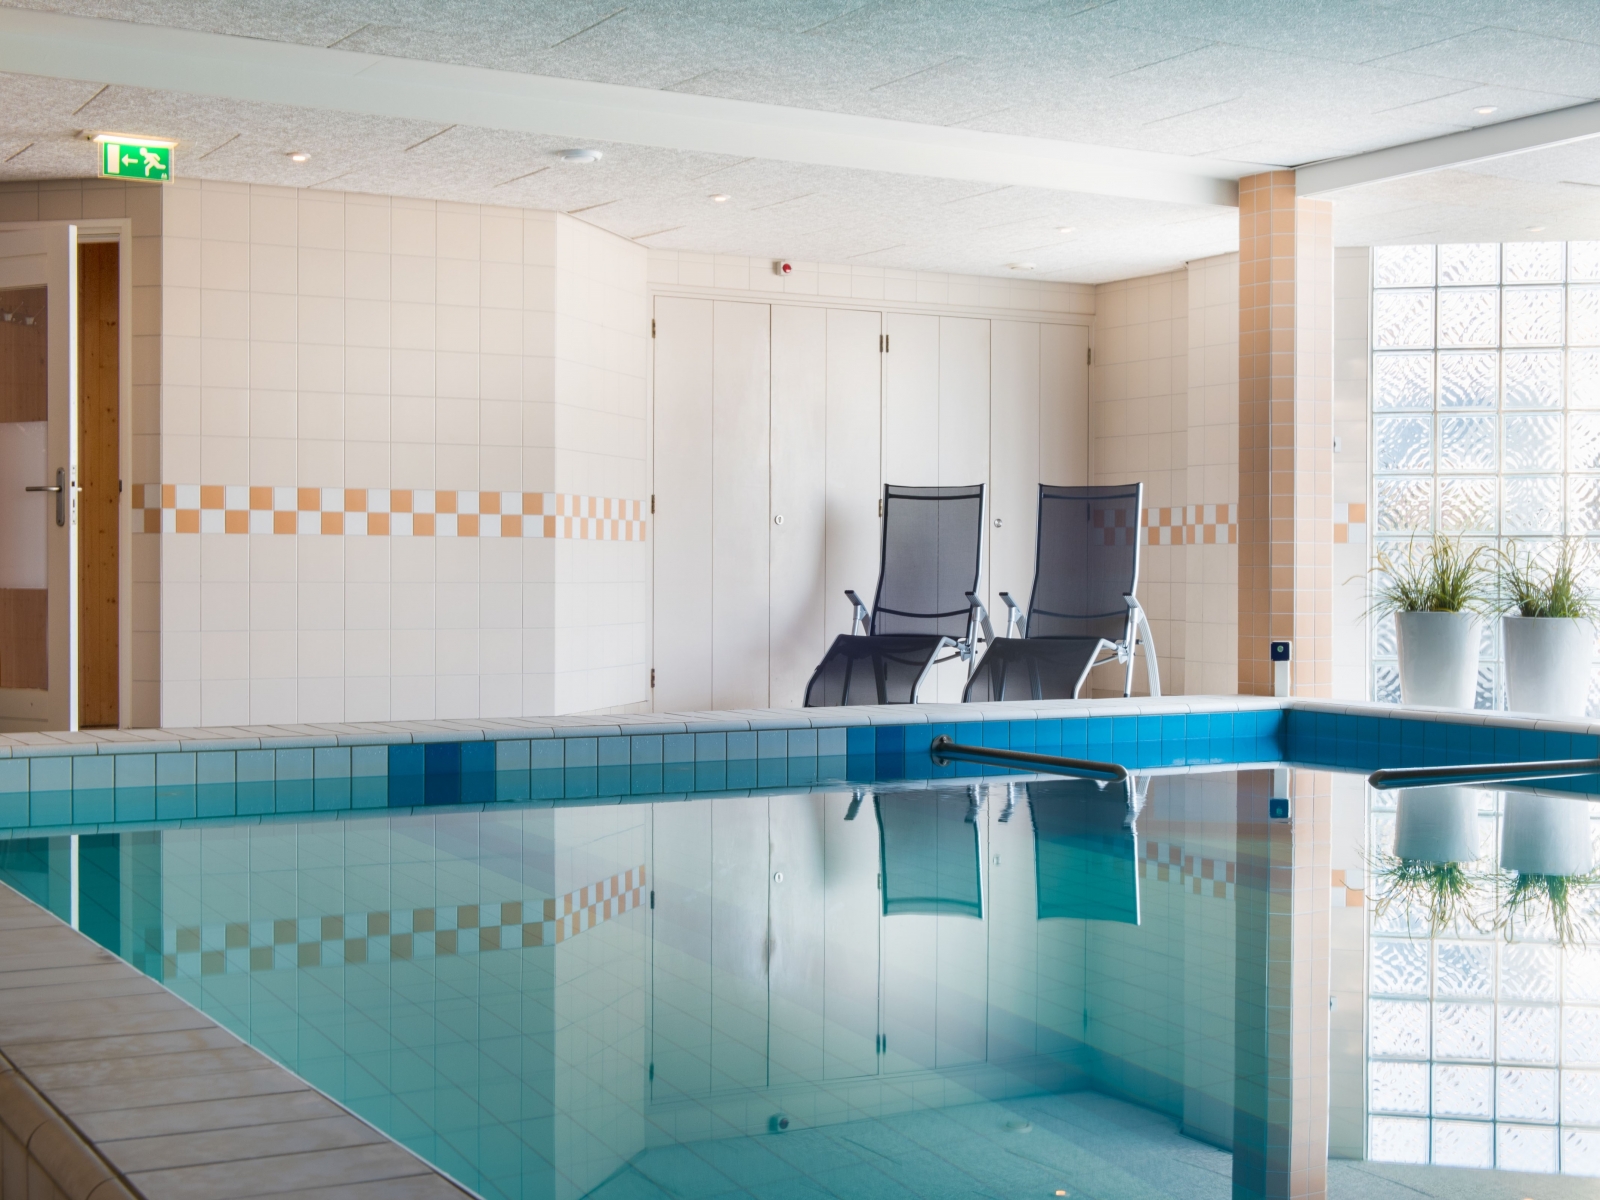 Paping Hotel & Spa <br/>63.00 ew <br/> <a href='http://vakantieoplossing.nl/outpage/?id=c5fbbd68a04721773f8451ecac2016bc' target='_blank'>View Details</a>